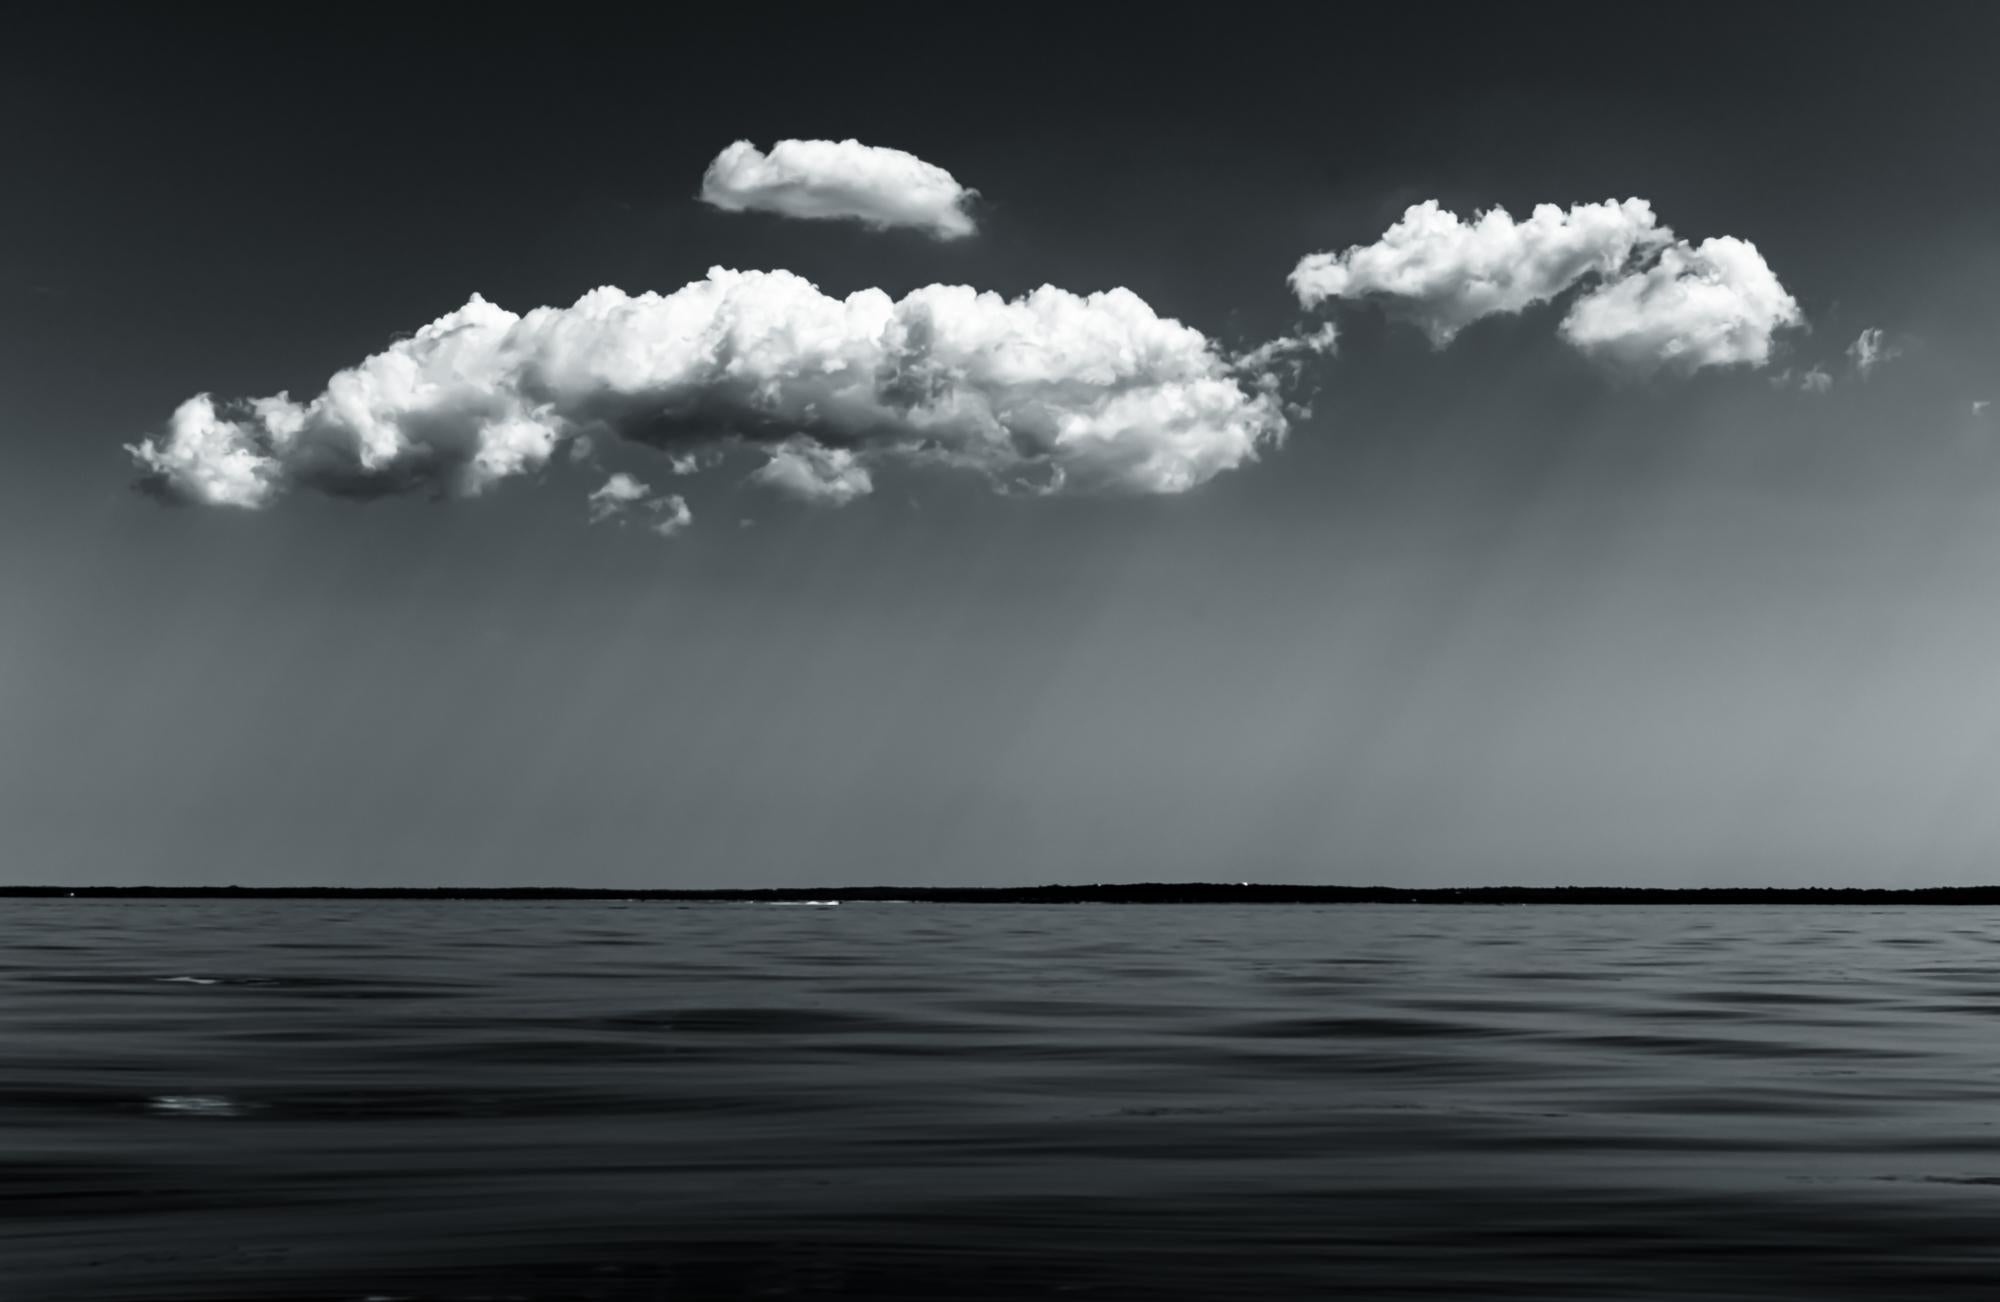 Howard Lewis Landscape Photograph - Limited Edition Black and White Photograph - " Sea Clouds #4 "